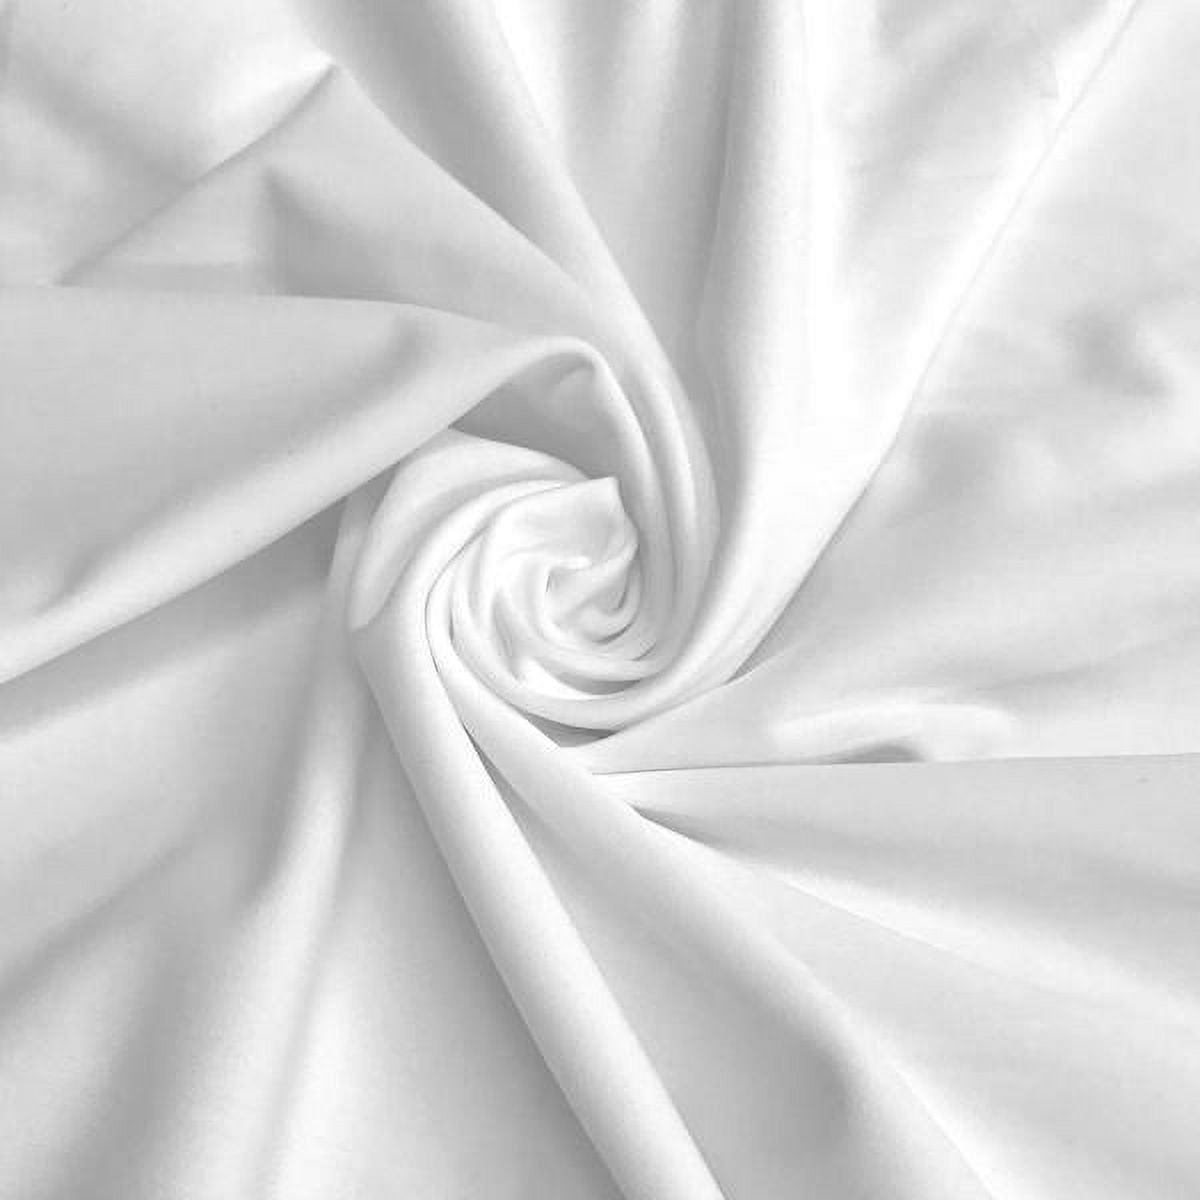 Spandex Matte Milliskin Nylon Spandex Fabric 4 Way Stretch 58 wide Sold By  The Yard Many Colors (White) 